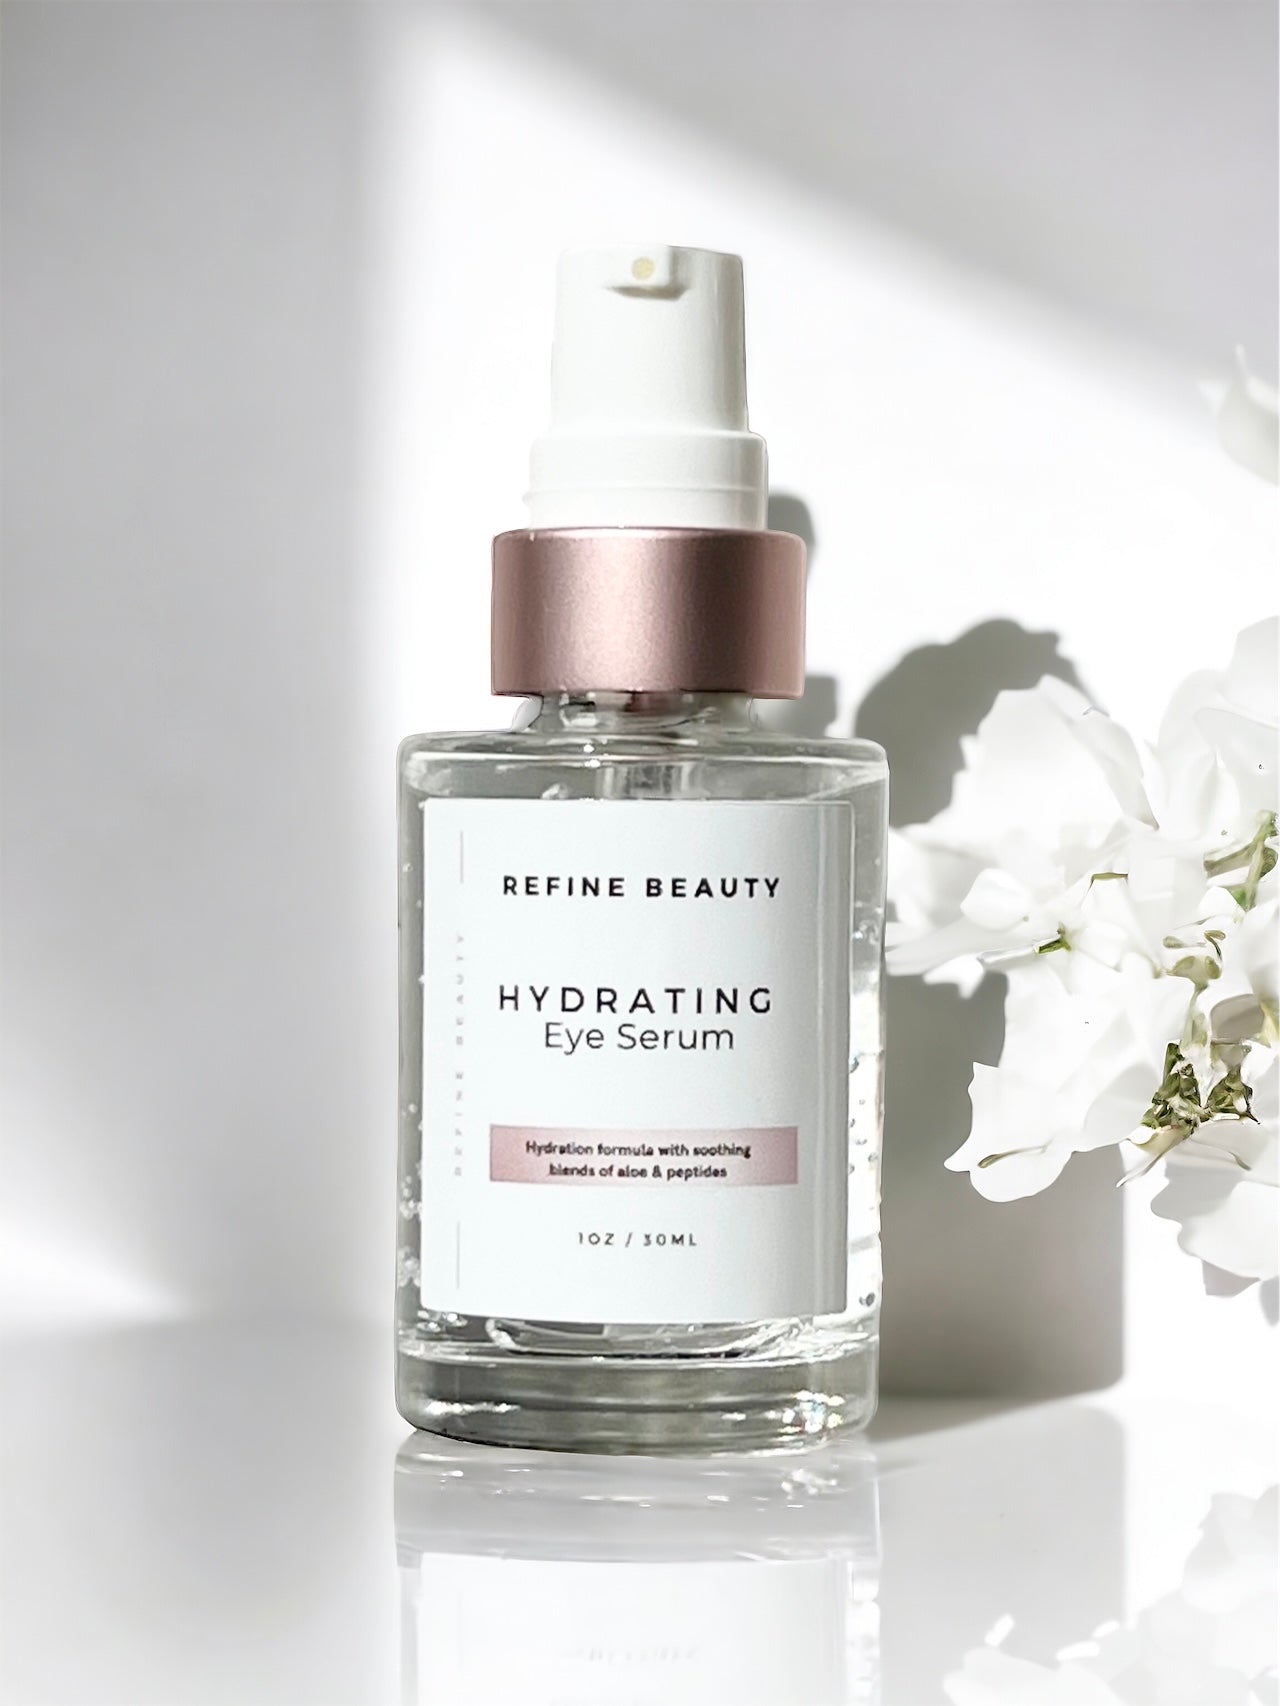 Revitalize delicate under-eye skin with our hydrating eye serum, reducing puffiness, minimizing dark circles, and restoring a youthful, refreshed appearance.